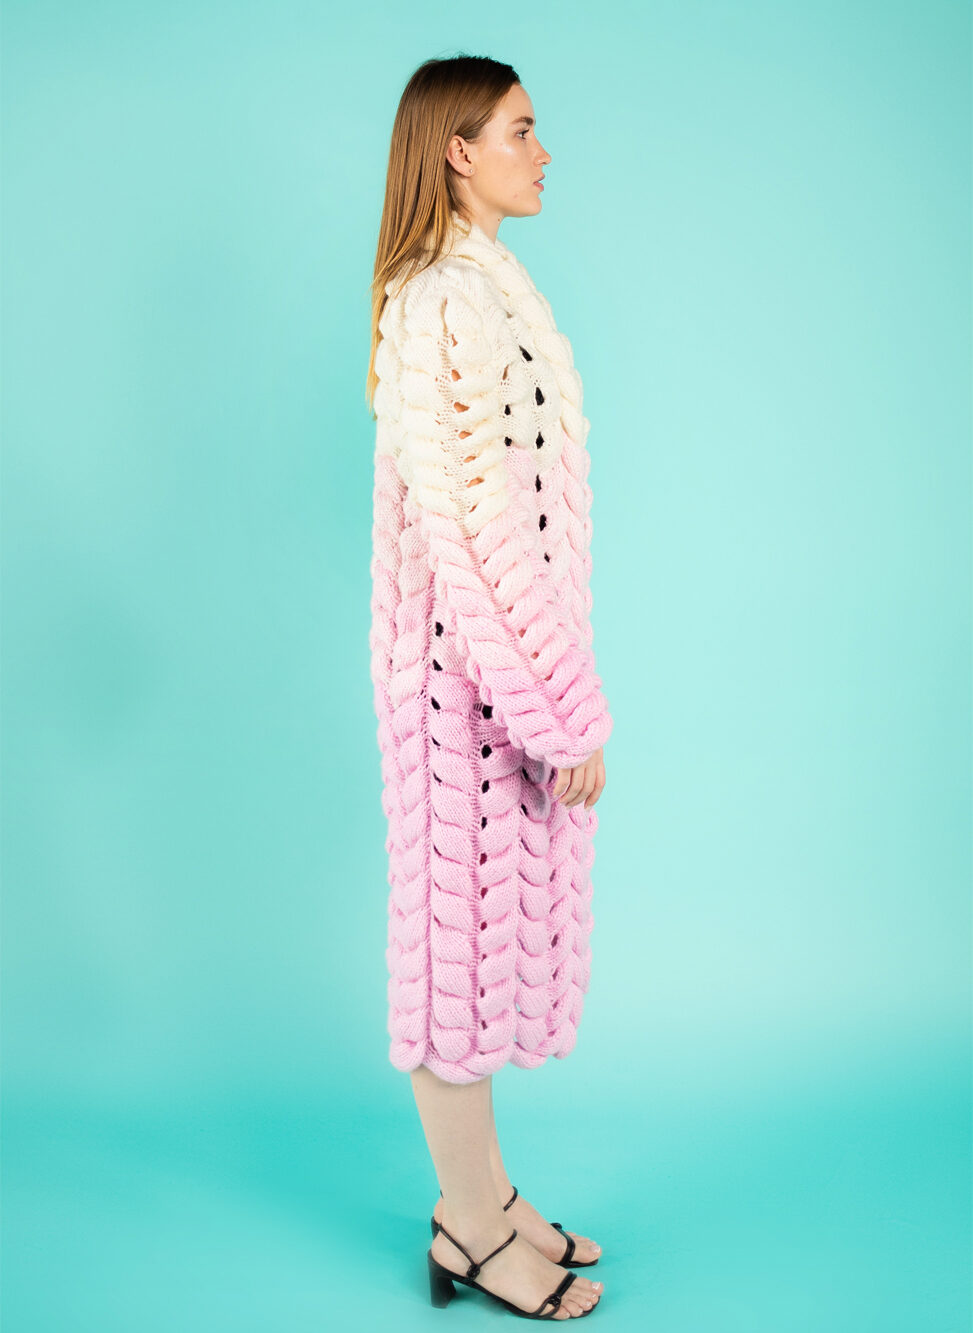 Amelie Wool Coat - Porcelain and Pink-2022-right view